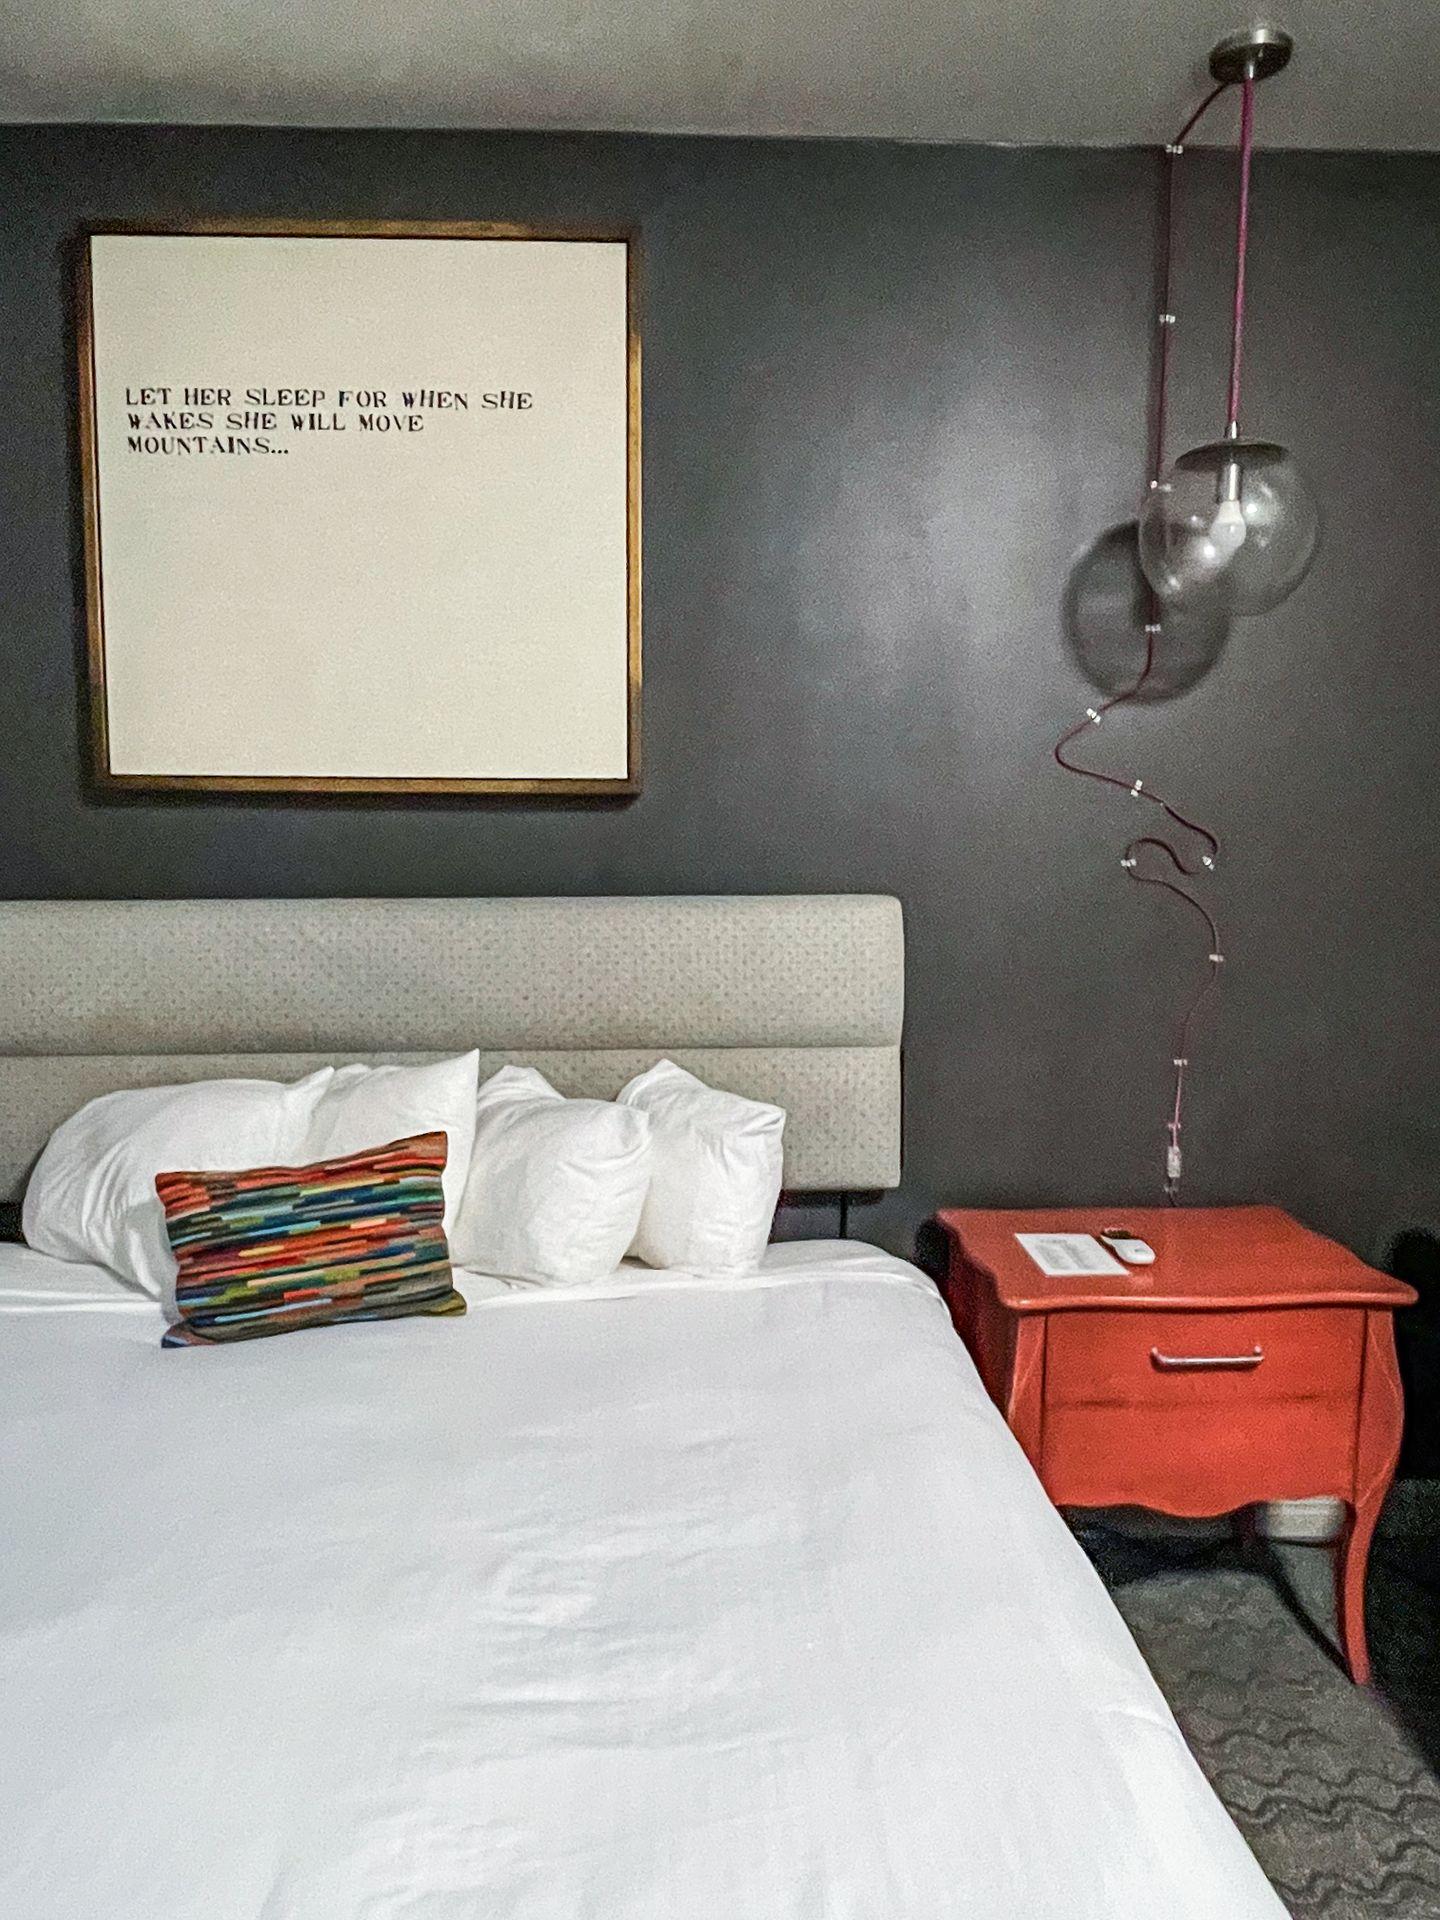 A bed next to a bright orange night stand in Hotel Ylem